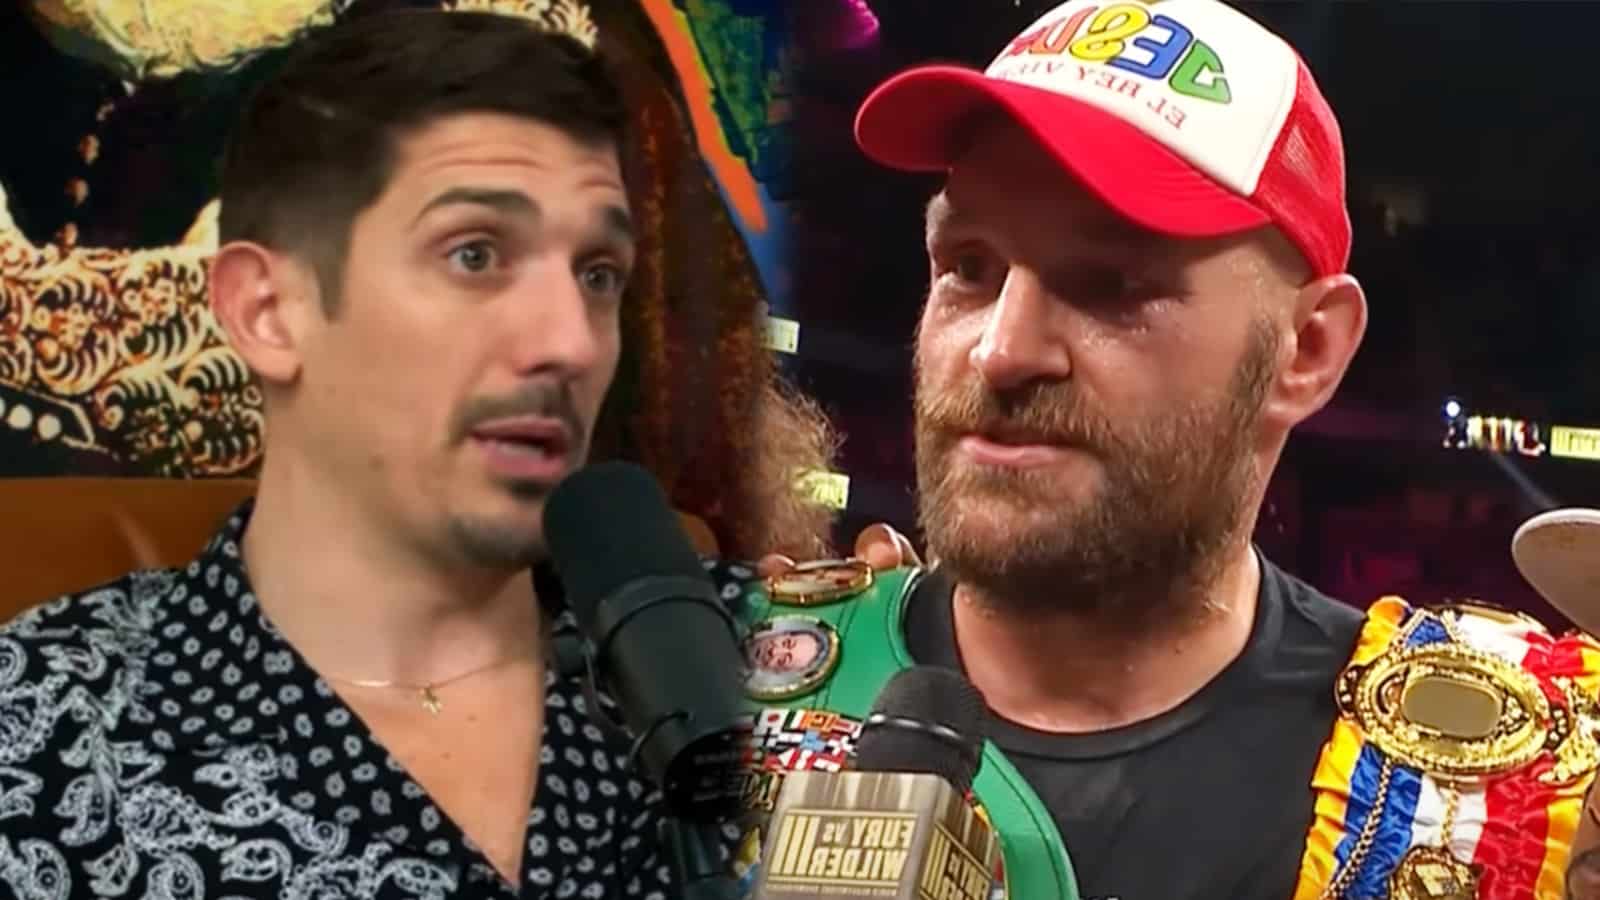 Comedian Andrew Schulz next to Boxing Champion Tyson Fury